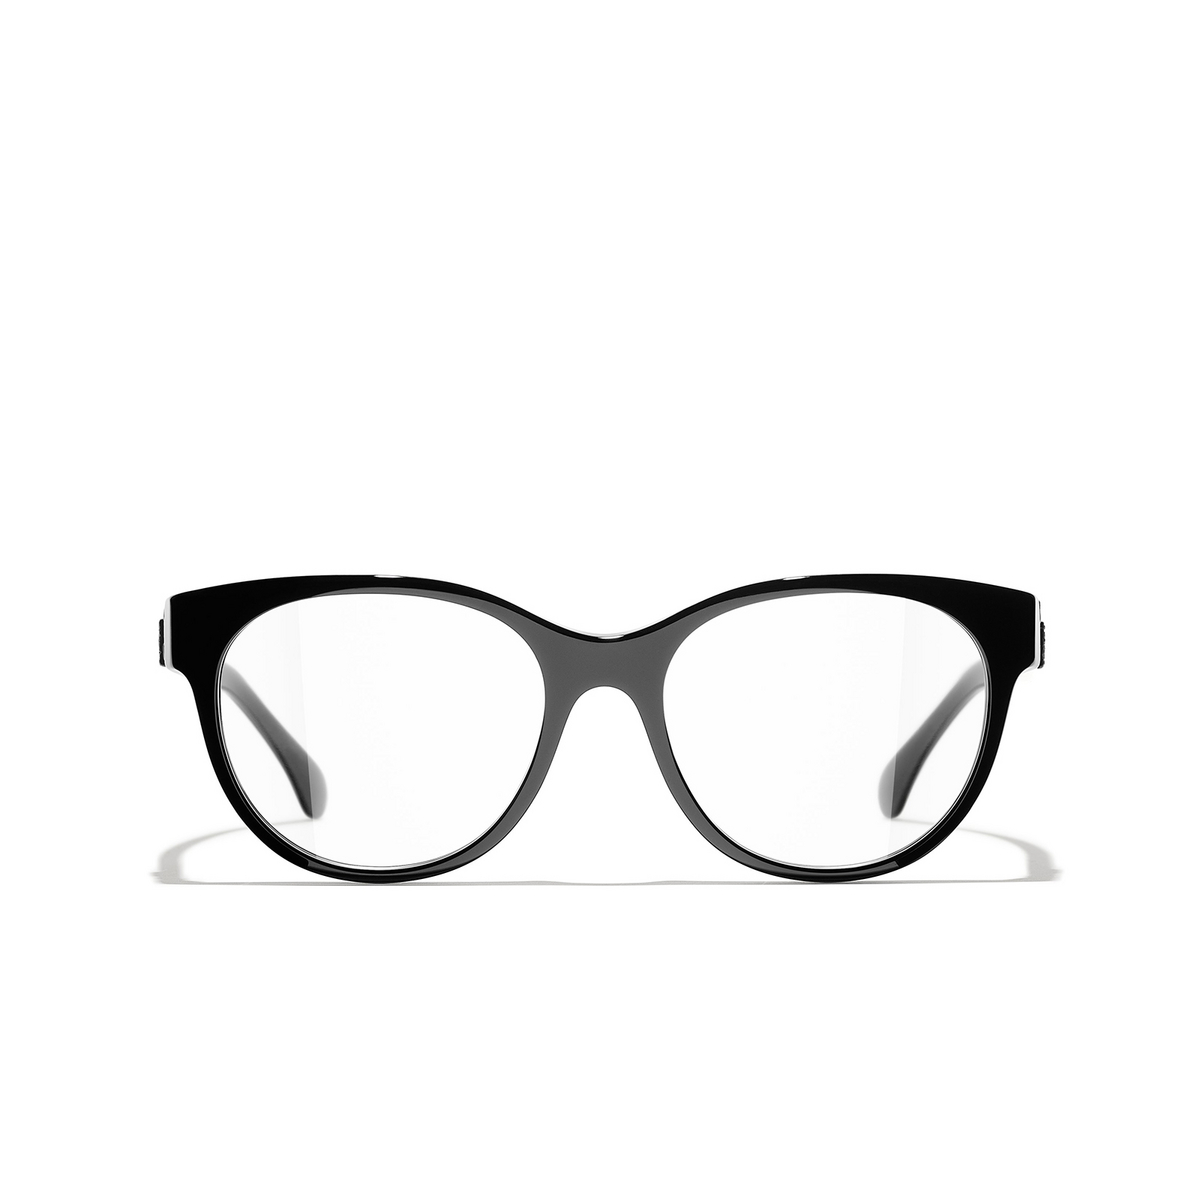 CHANEL butterfly Eyeglasses C888 Black - front view